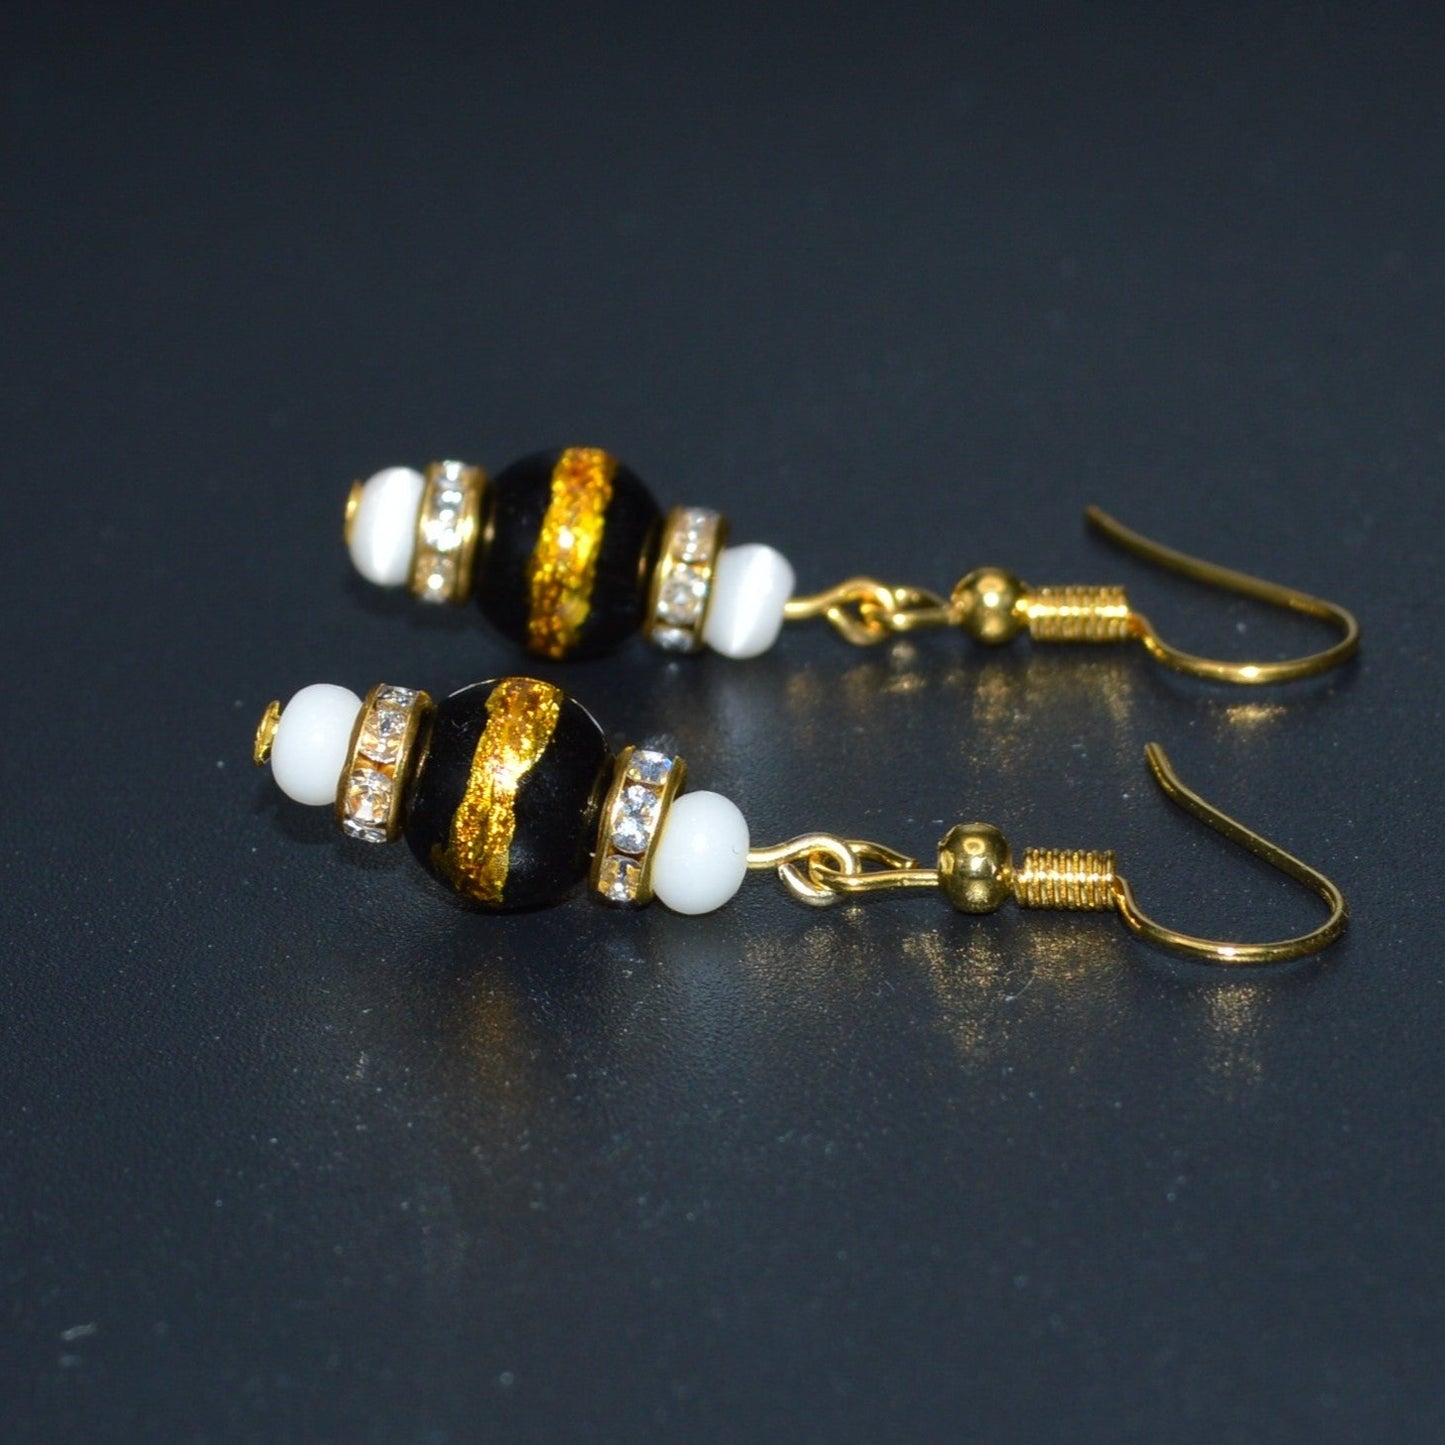 Black with a Gold Stripe, Cat's Eye Glass and Crystal Earrings